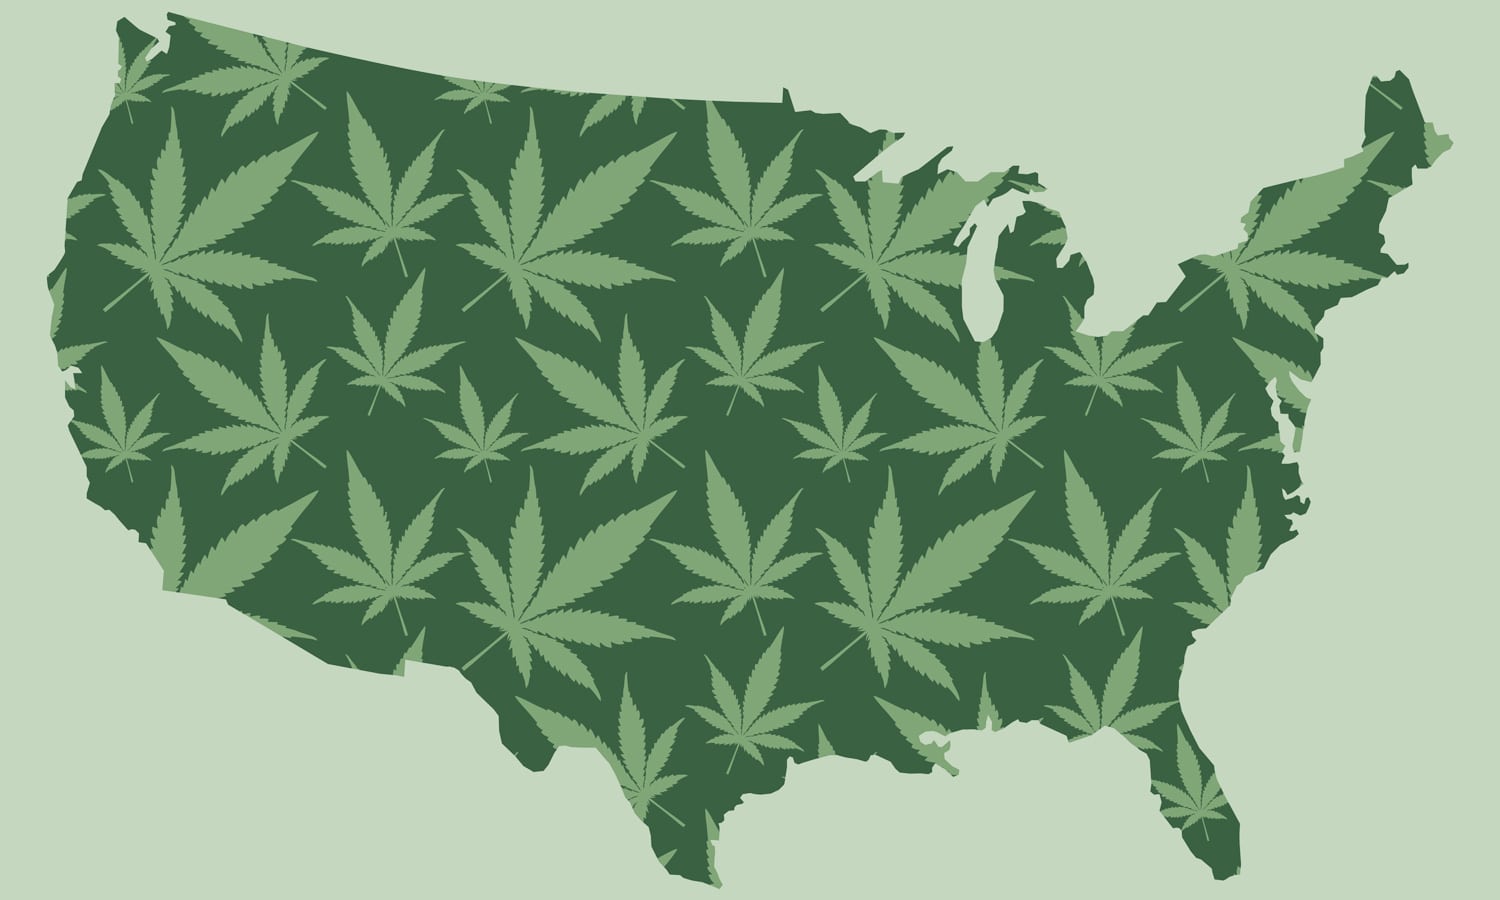 Which State Will Legalize Marijuana First In 2020- Kentucky, Ohio Or Indiana?